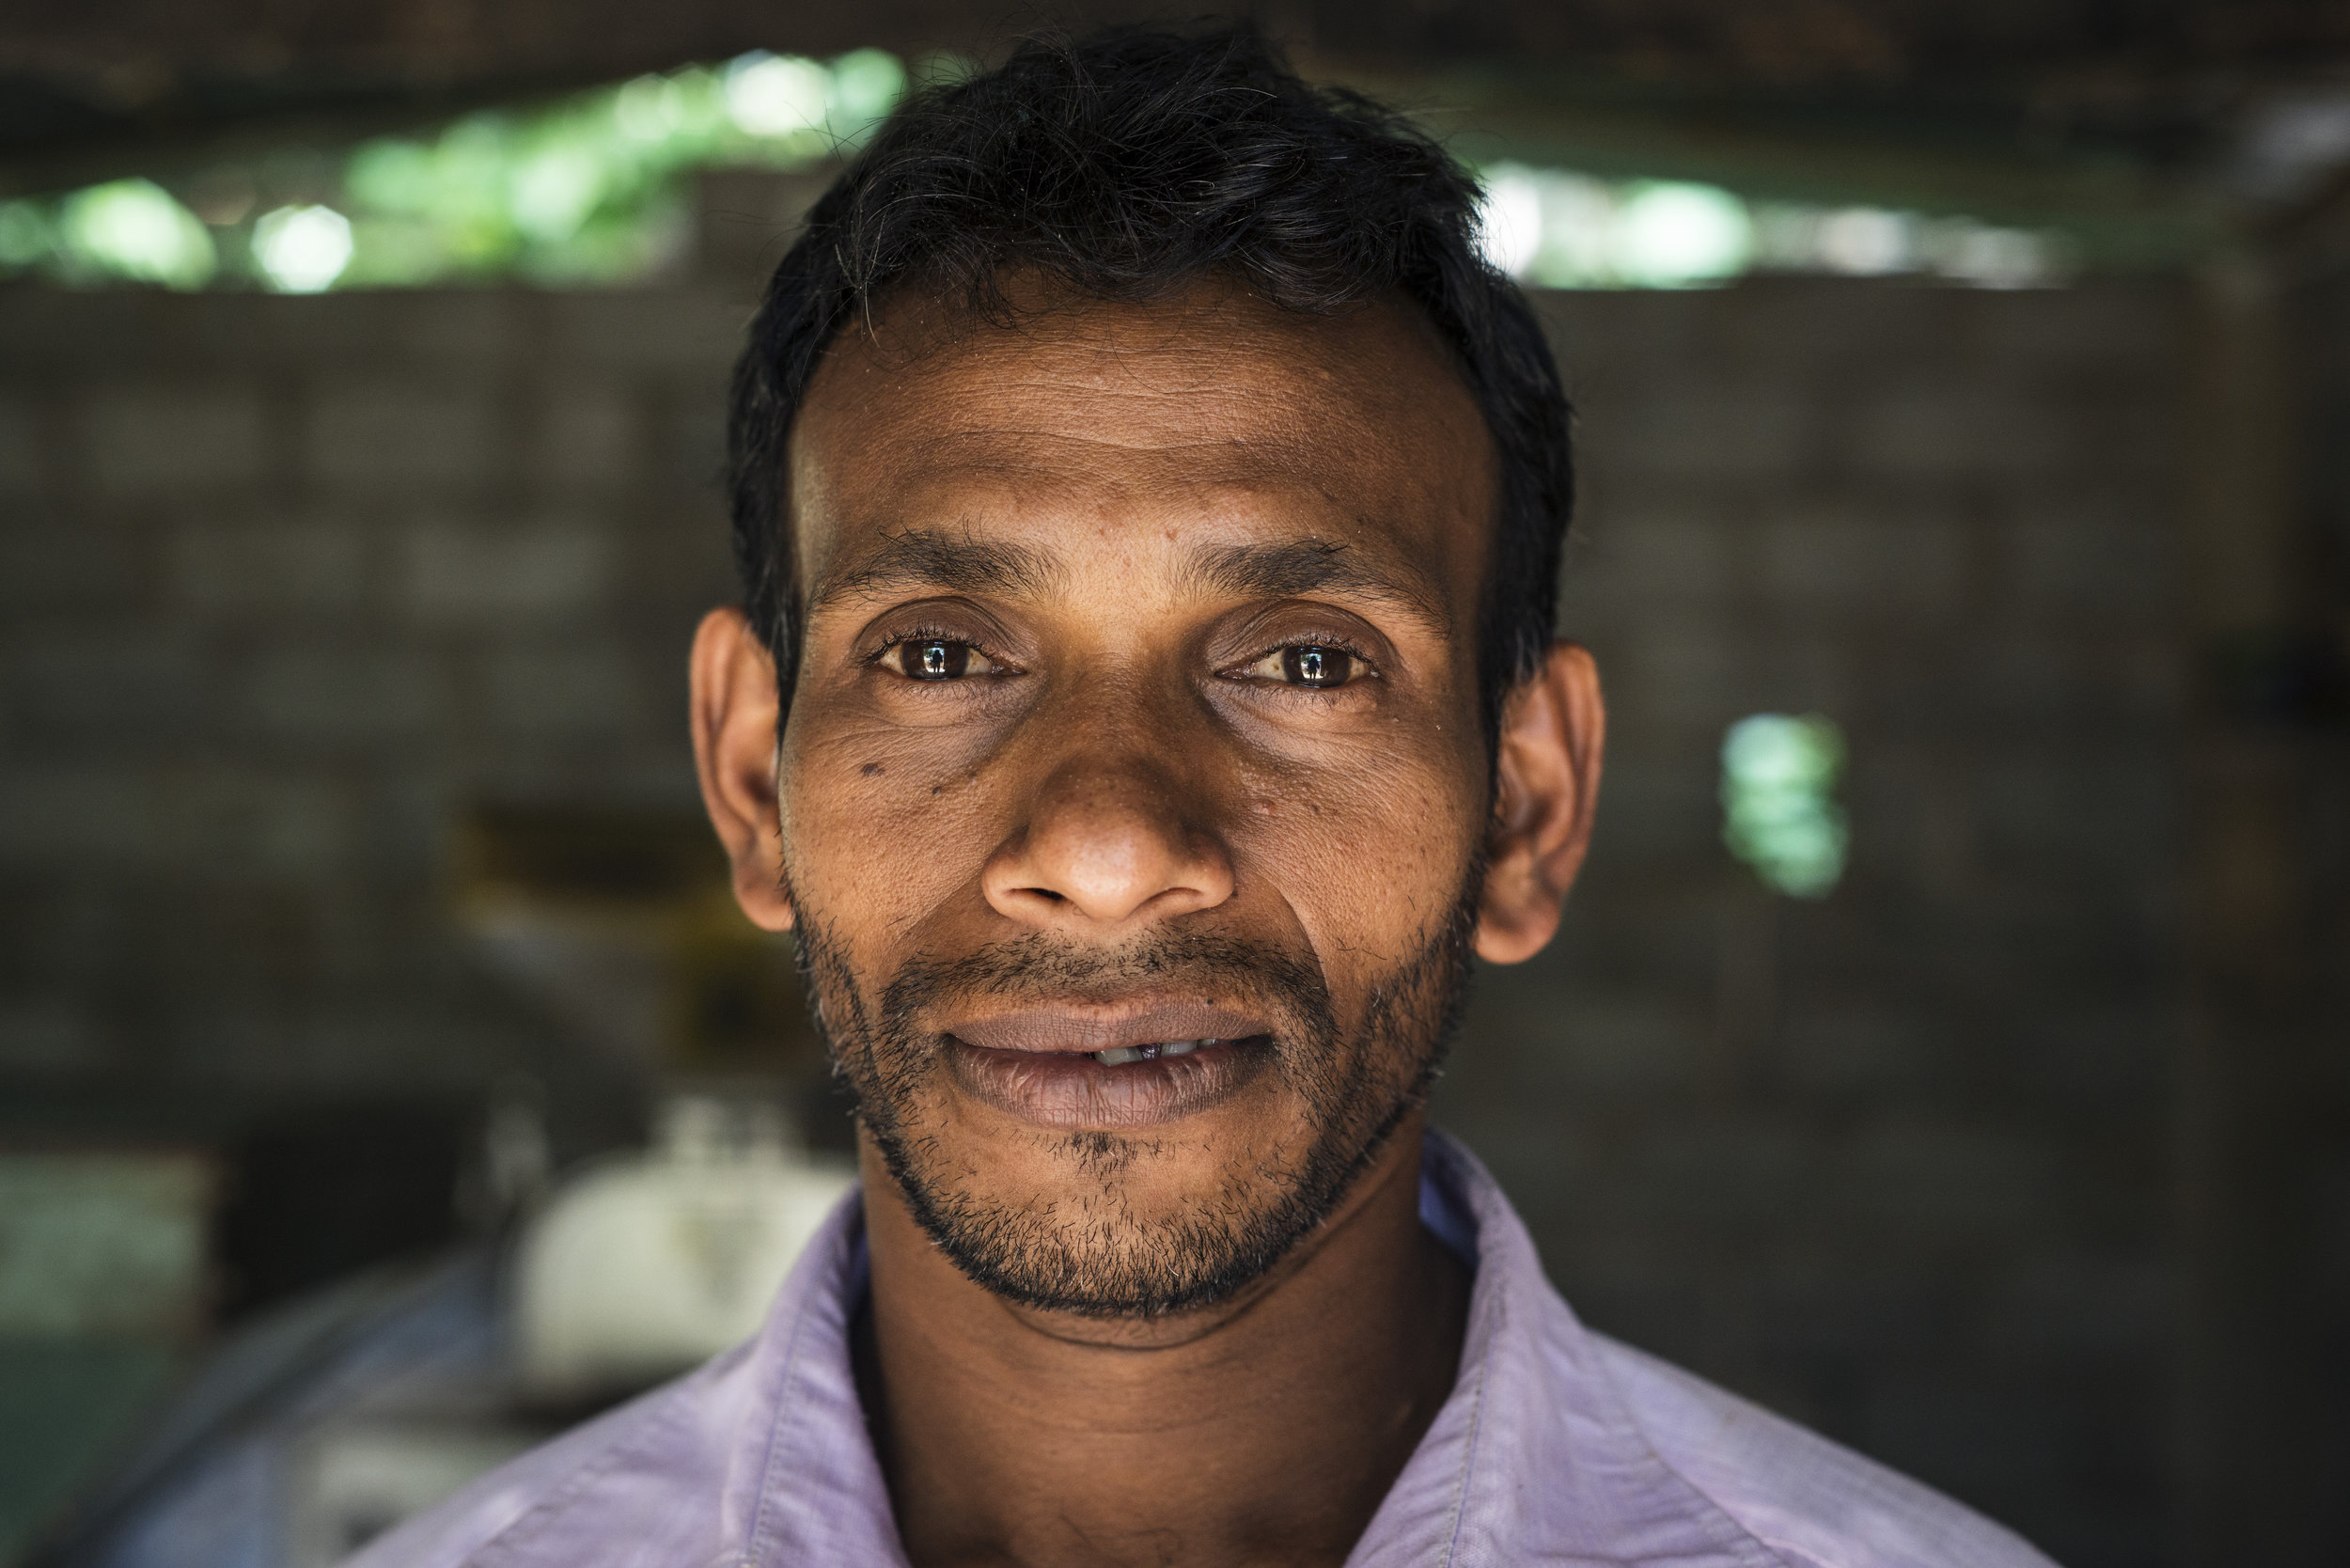  M.D. Gamini, 39, has lived in this village for his entire life. His ambition to provide a good life for his family was the driving force behind him starting his own business, the rice processing mill. 